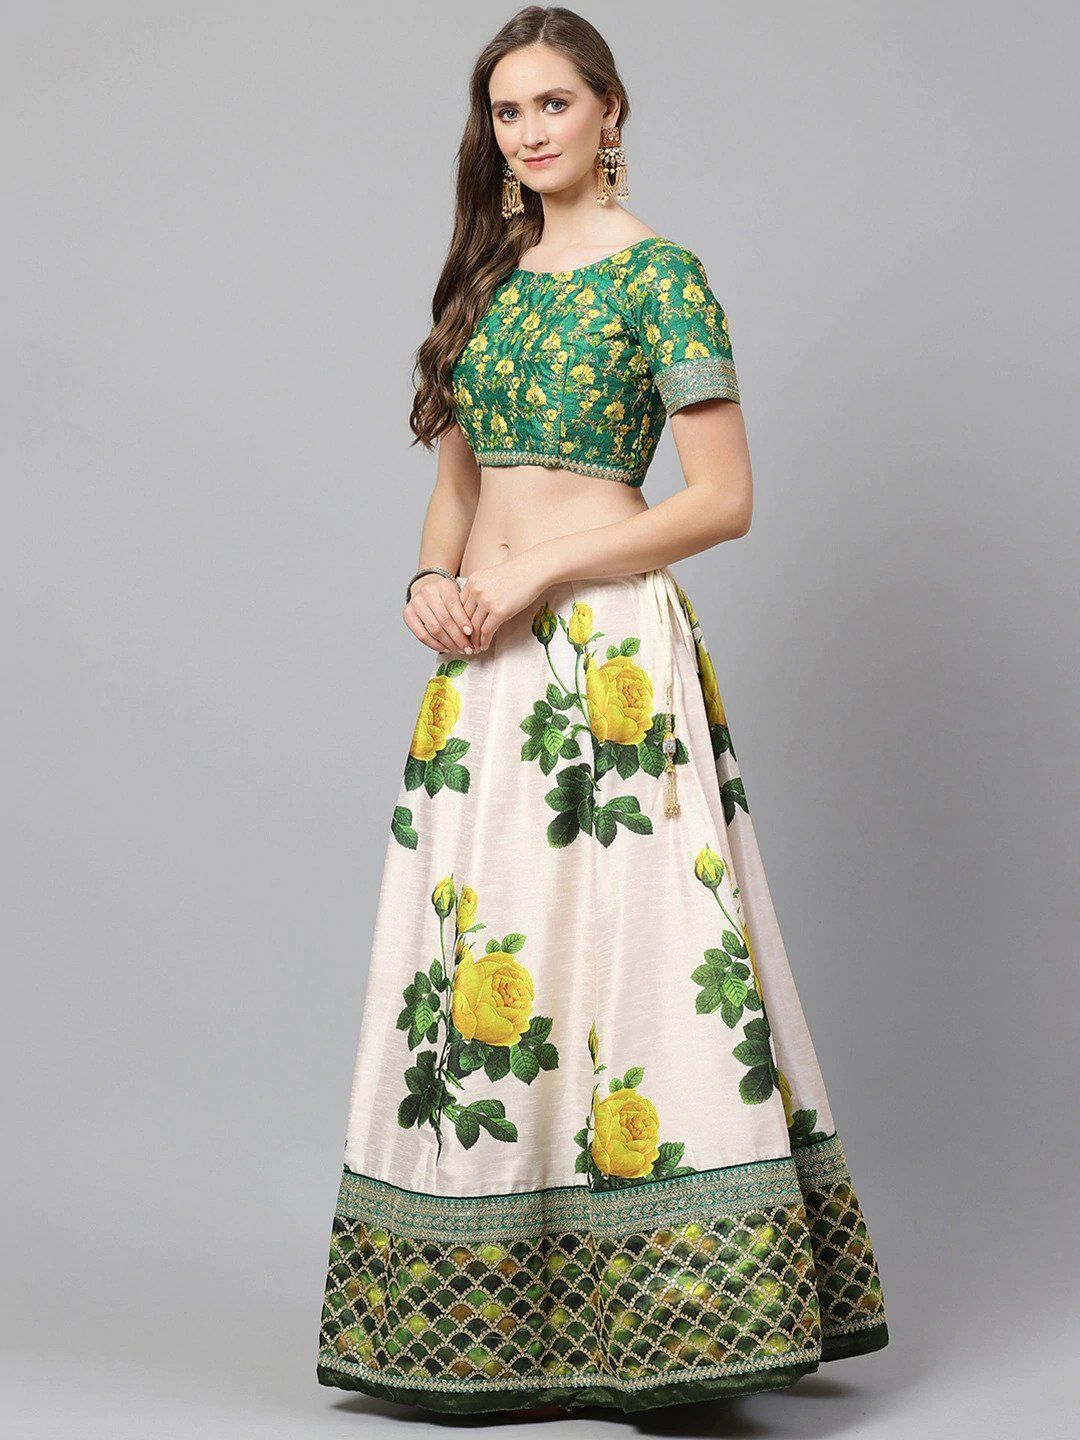 Semi-Stitched Suits Designs - Buy Semi Stitched Salwar Suits Online India